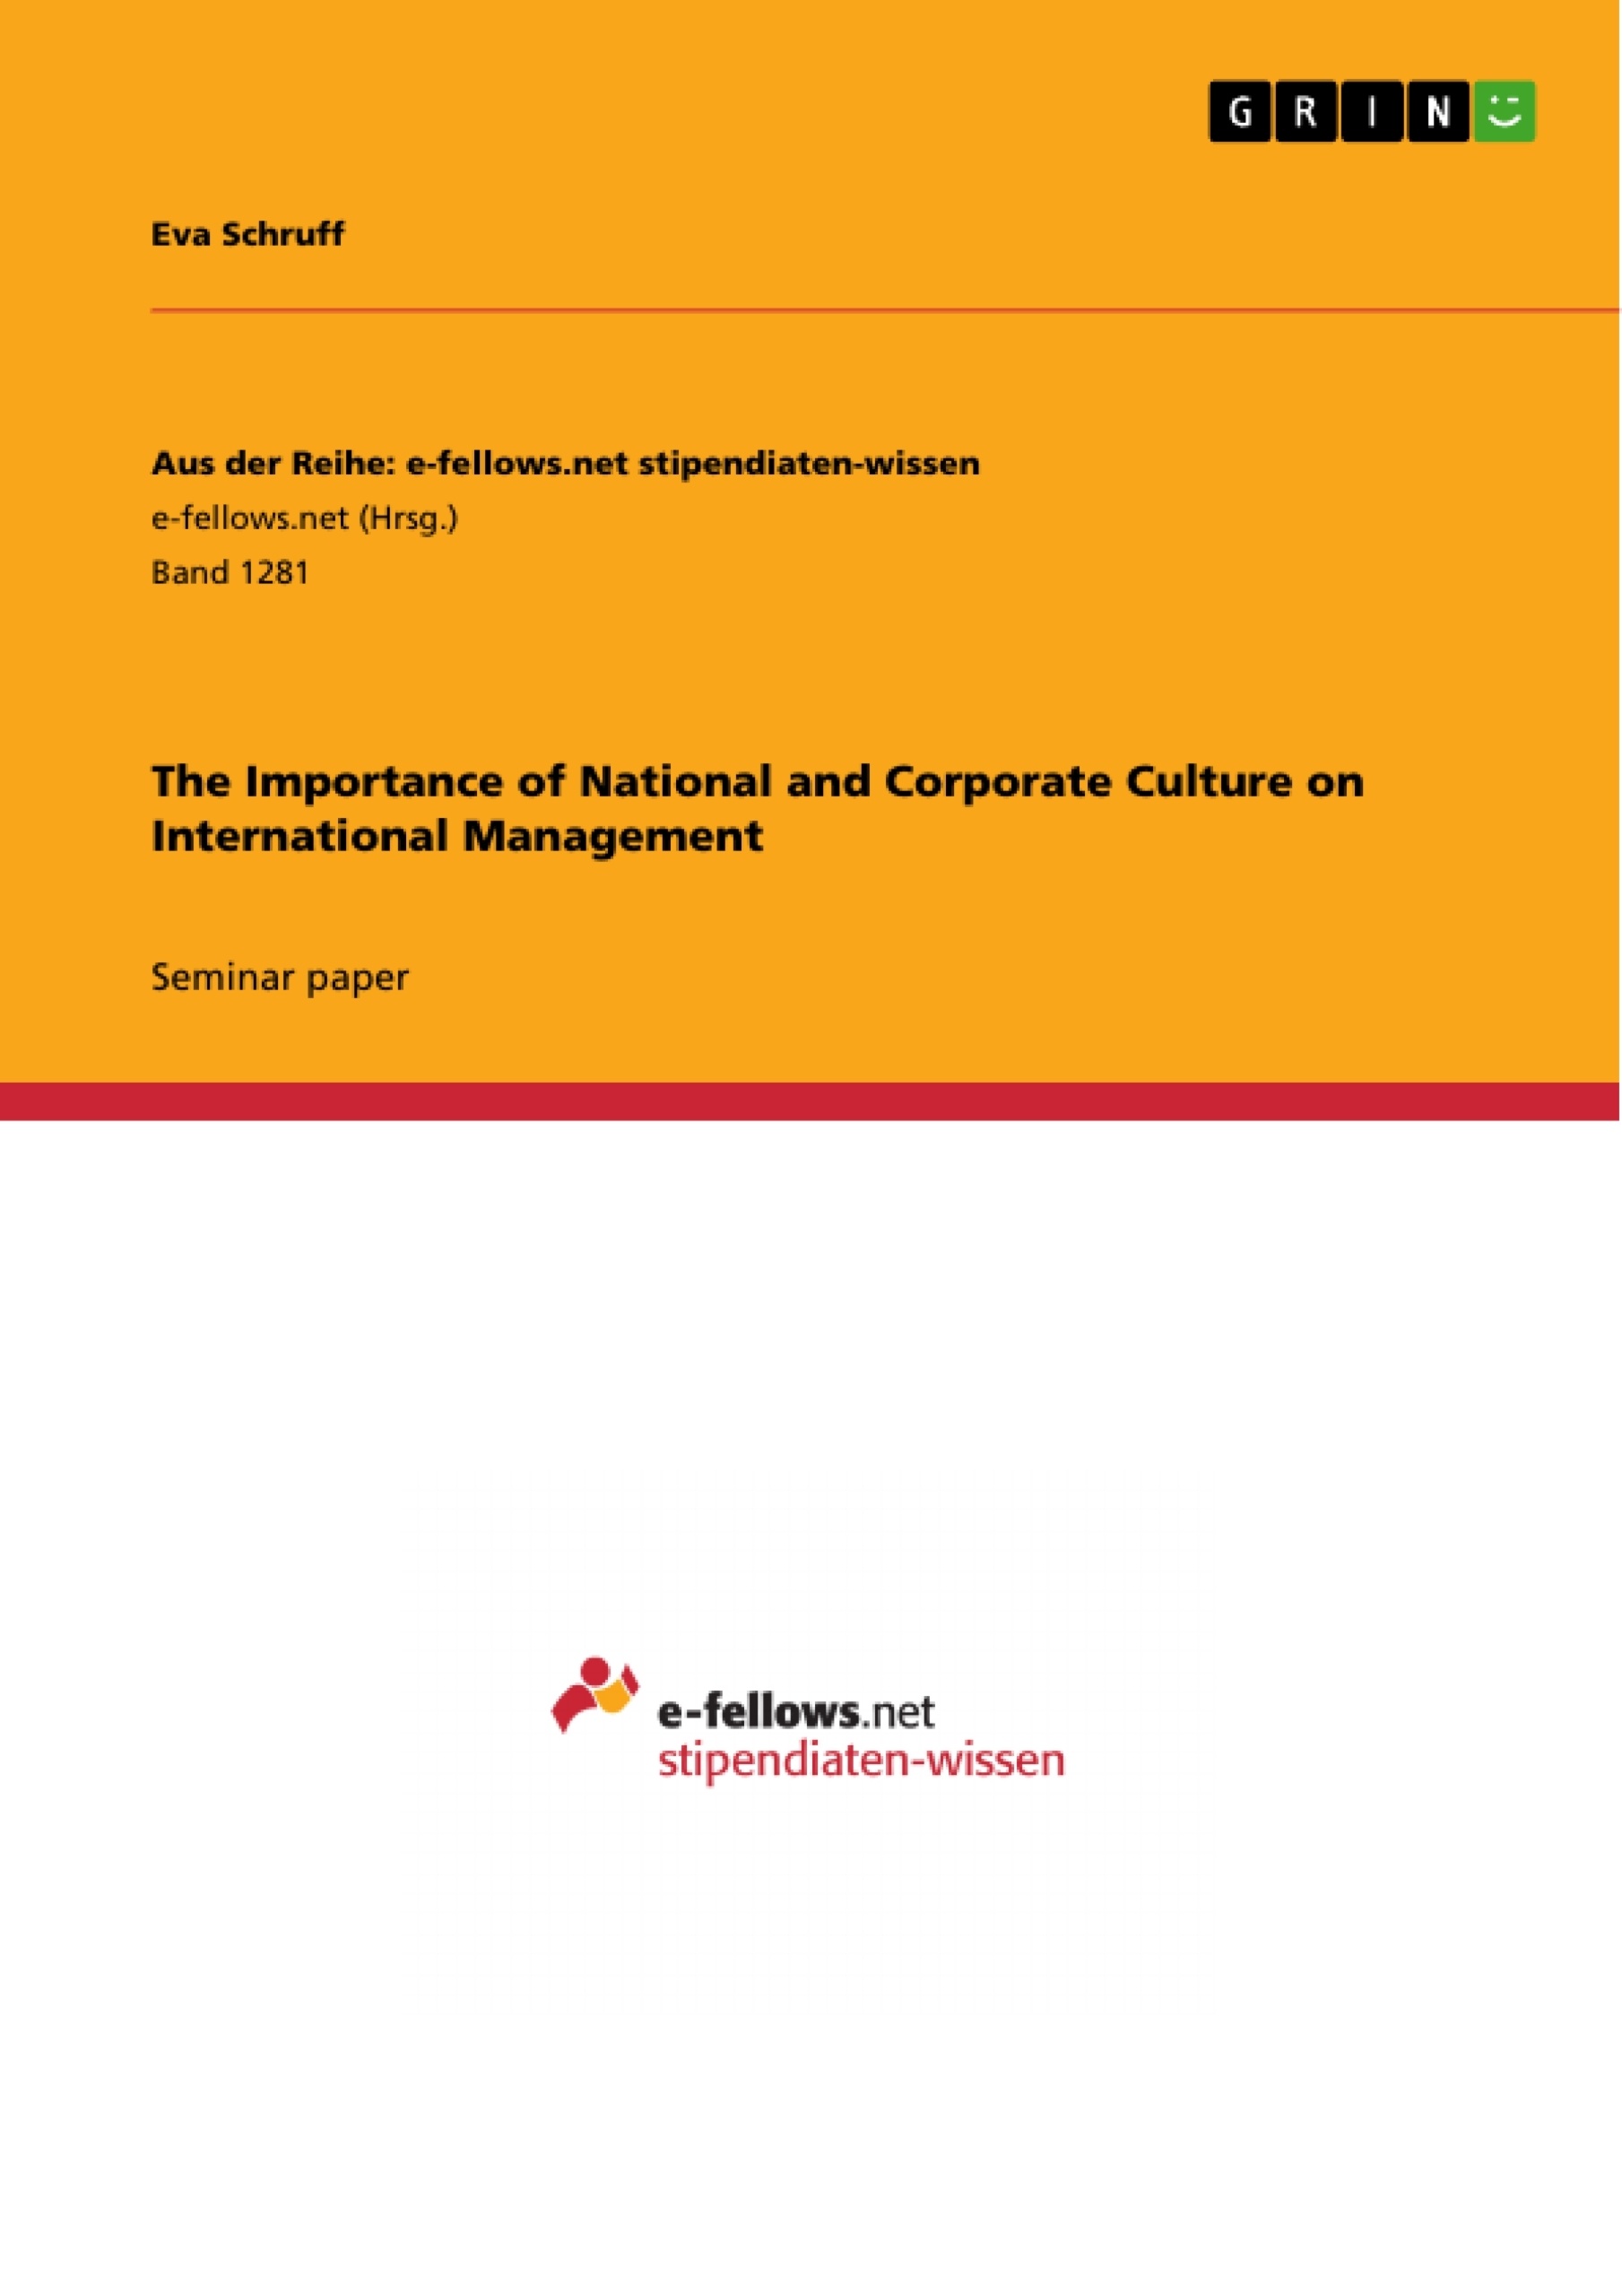 Título: The Importance of National and Corporate Culture on International Management